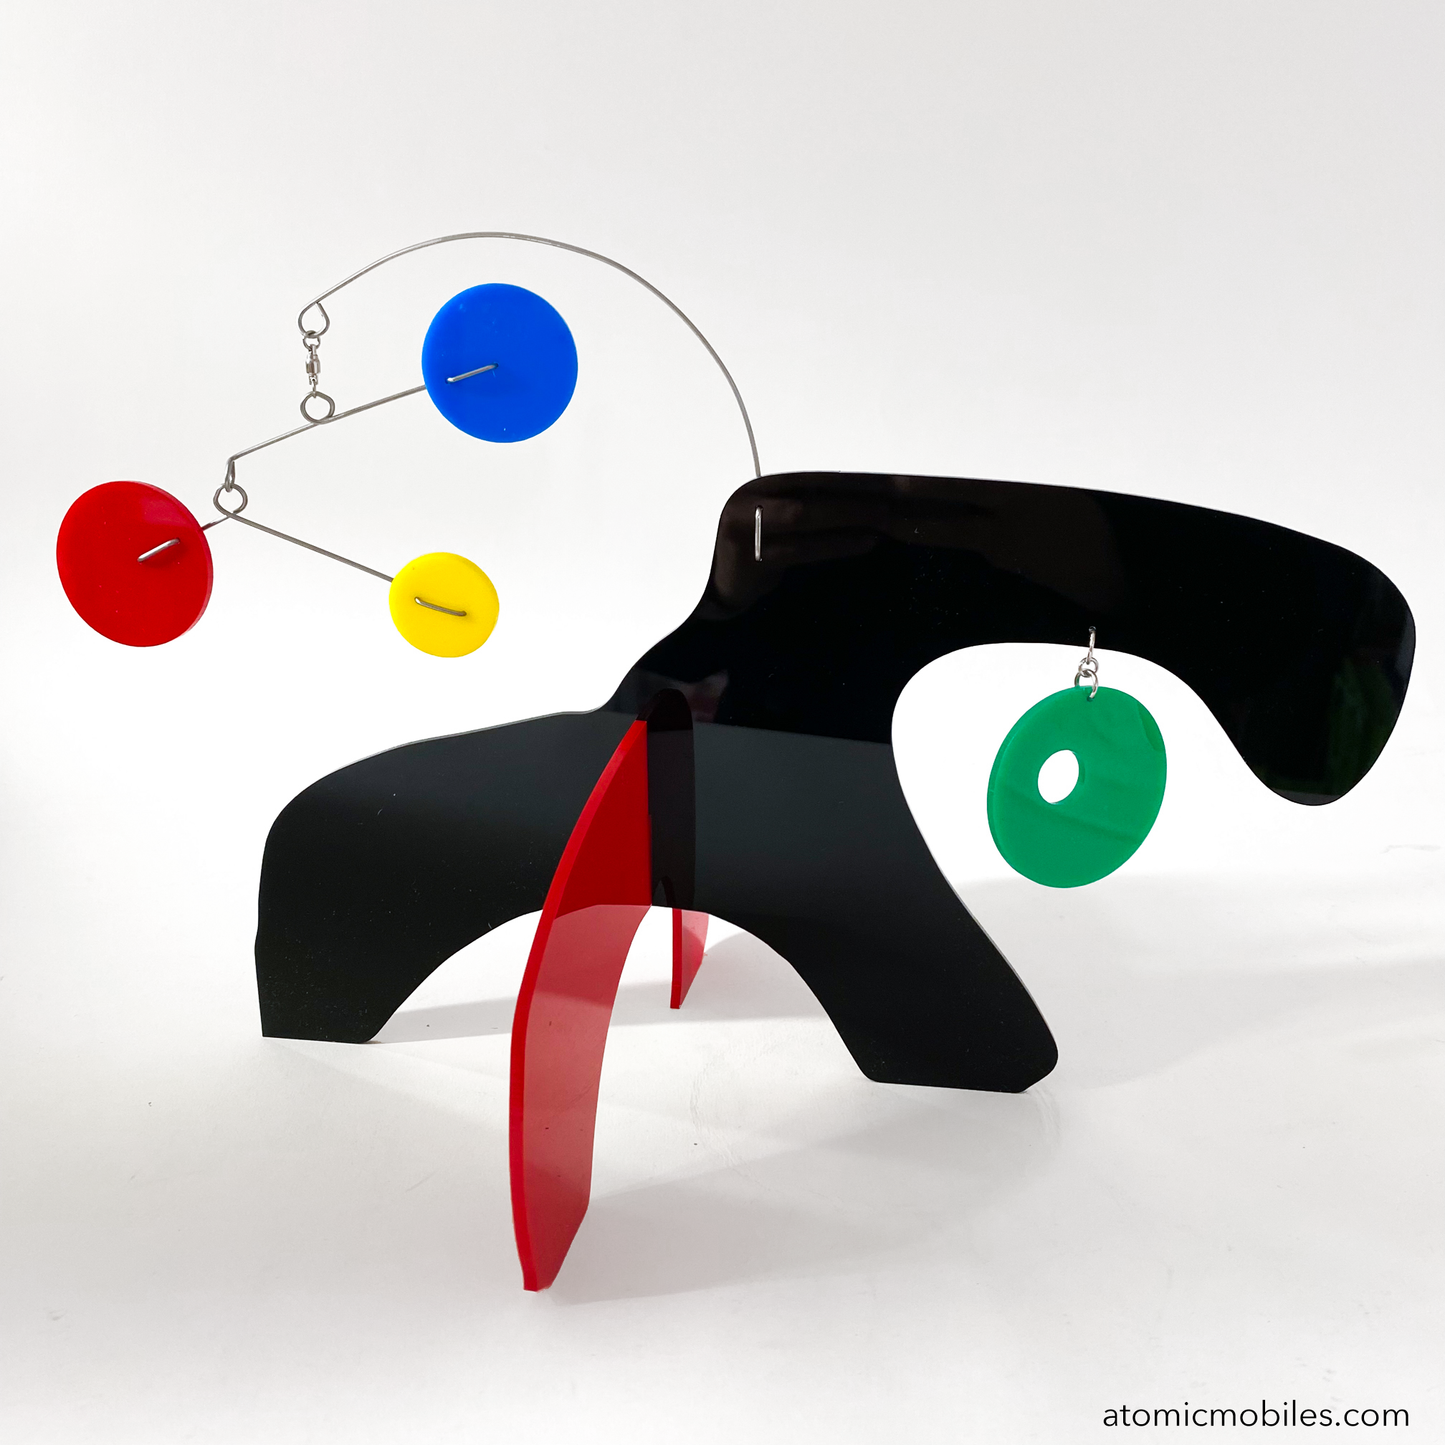 KinetiCats Collection Turtle in Black, Red, Green, Yellow, Blue - one of 12 Modern Cute Abstract Animal Art Sculpture Kinetic Stabiles inspired by Dada and mid century modern style art by AtomicMobiles.com